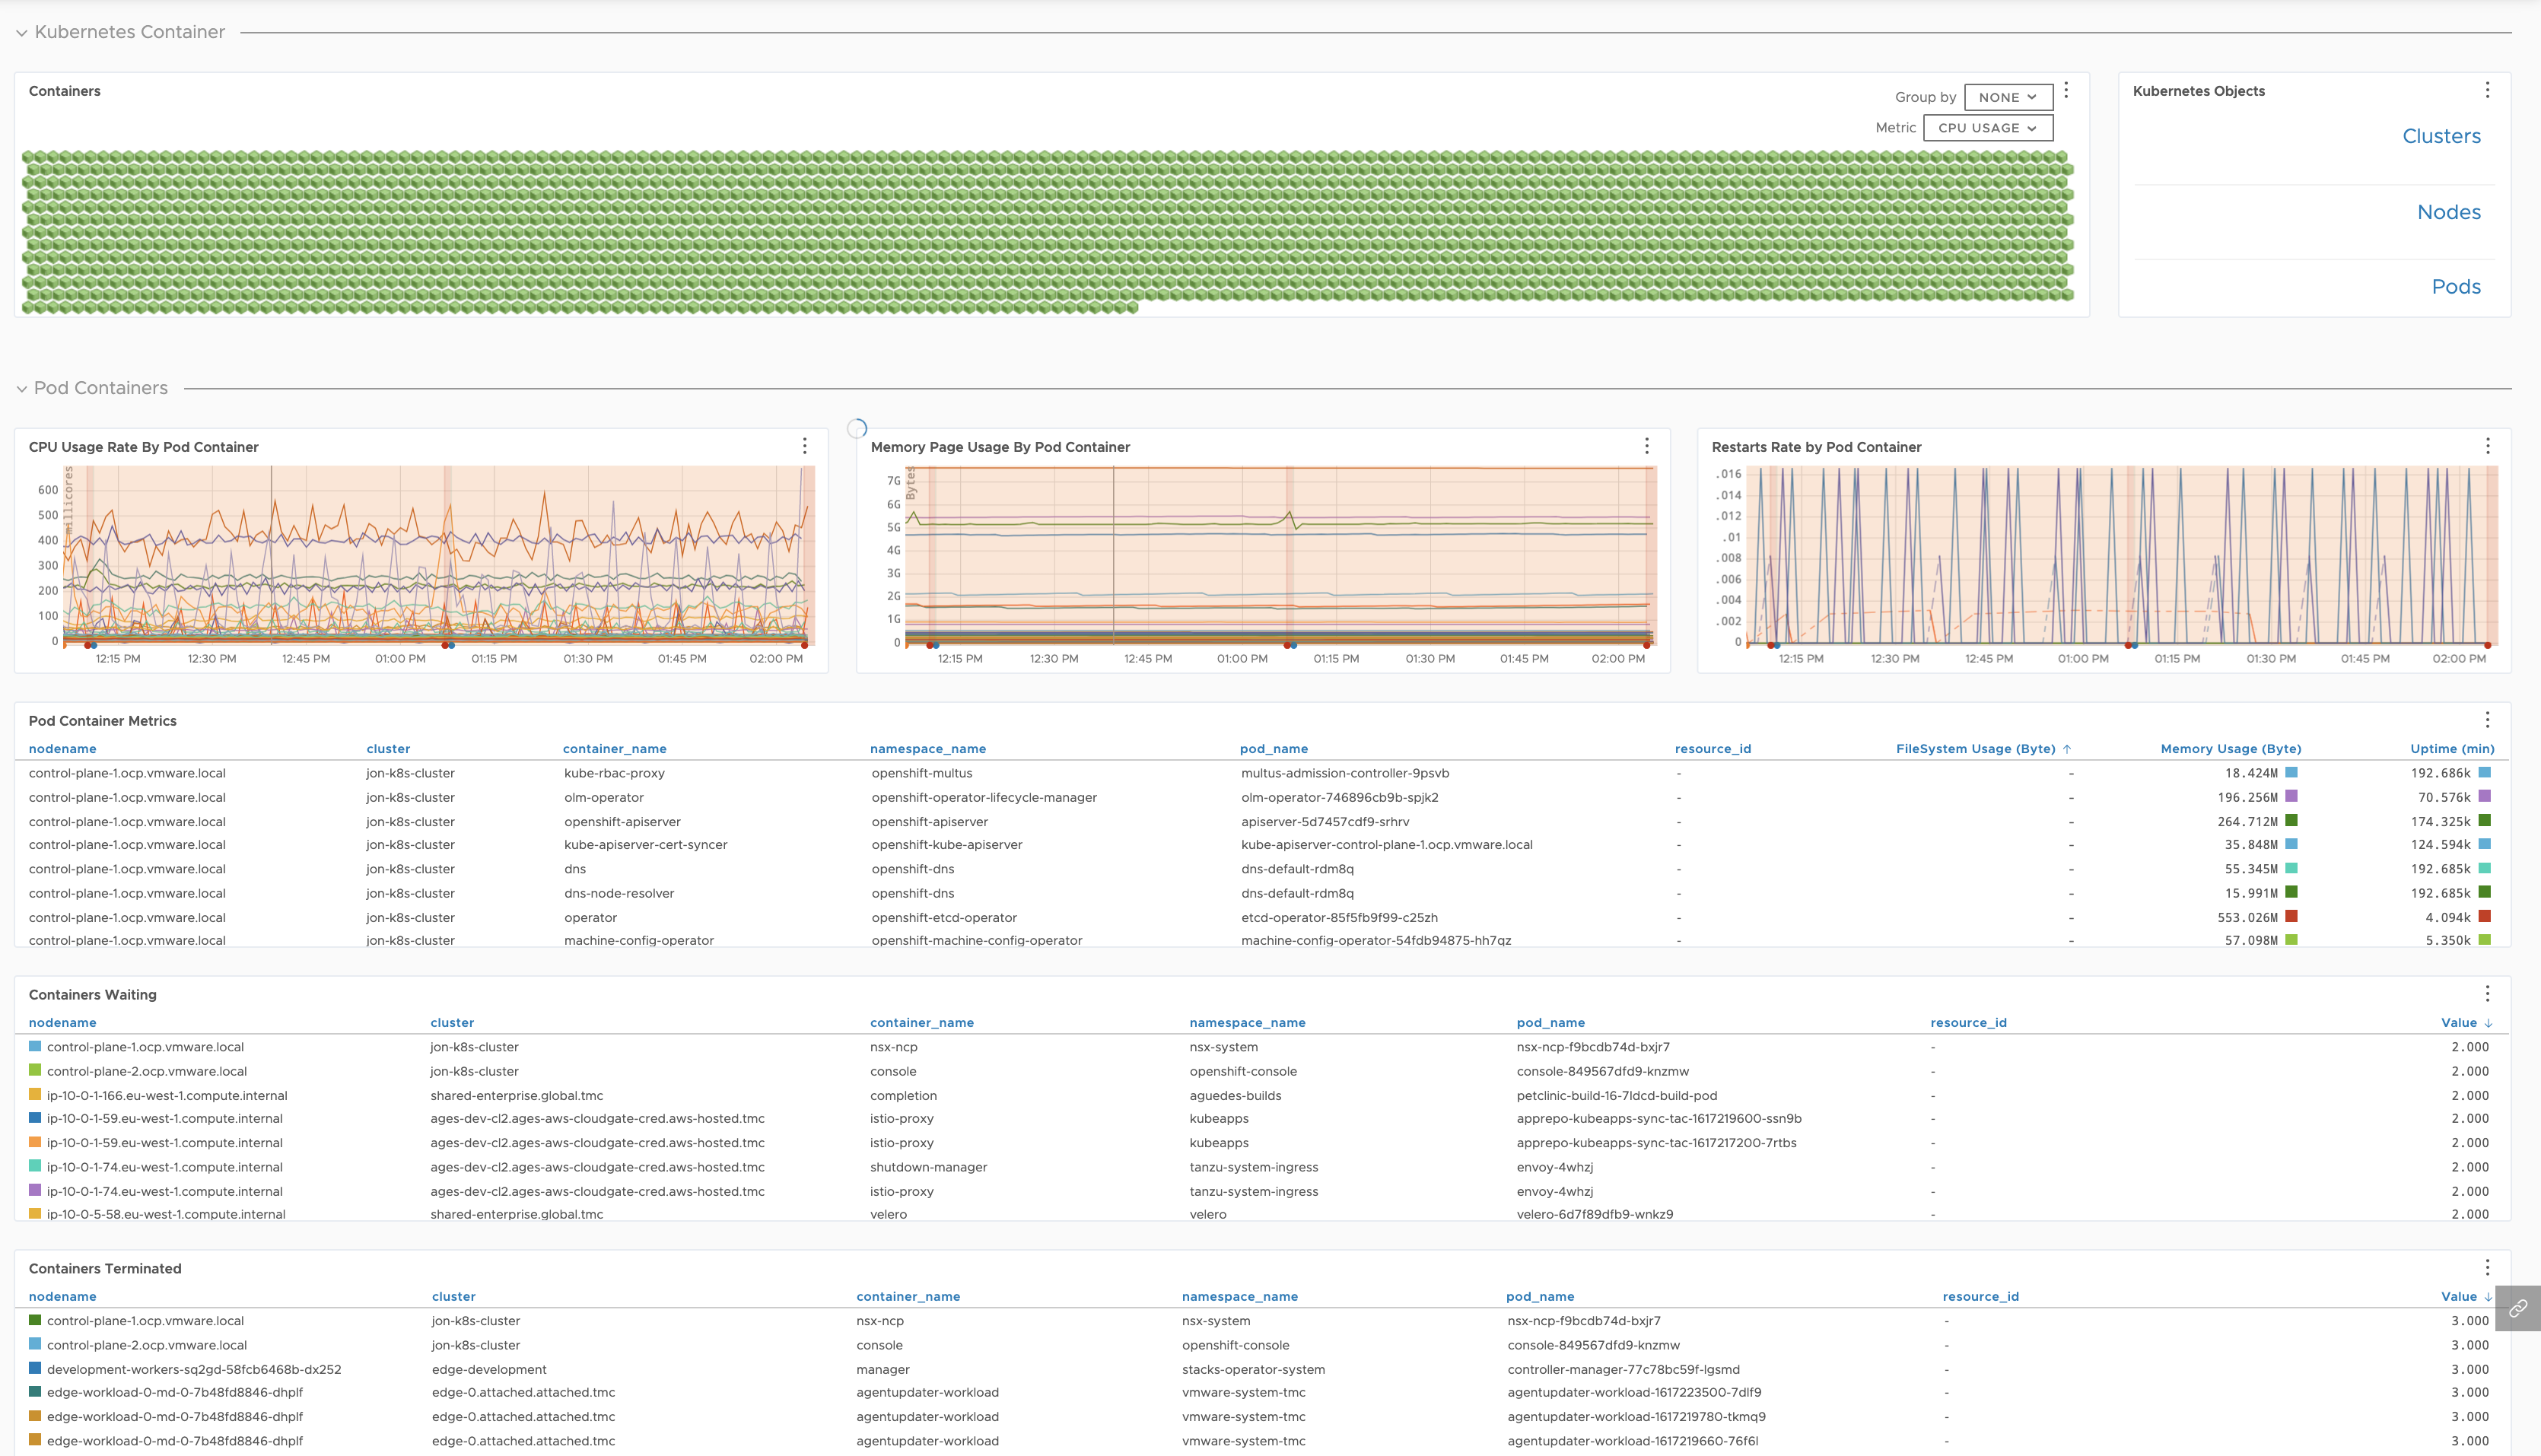 a screenshot of the Kubernetes container dashboard with charts.